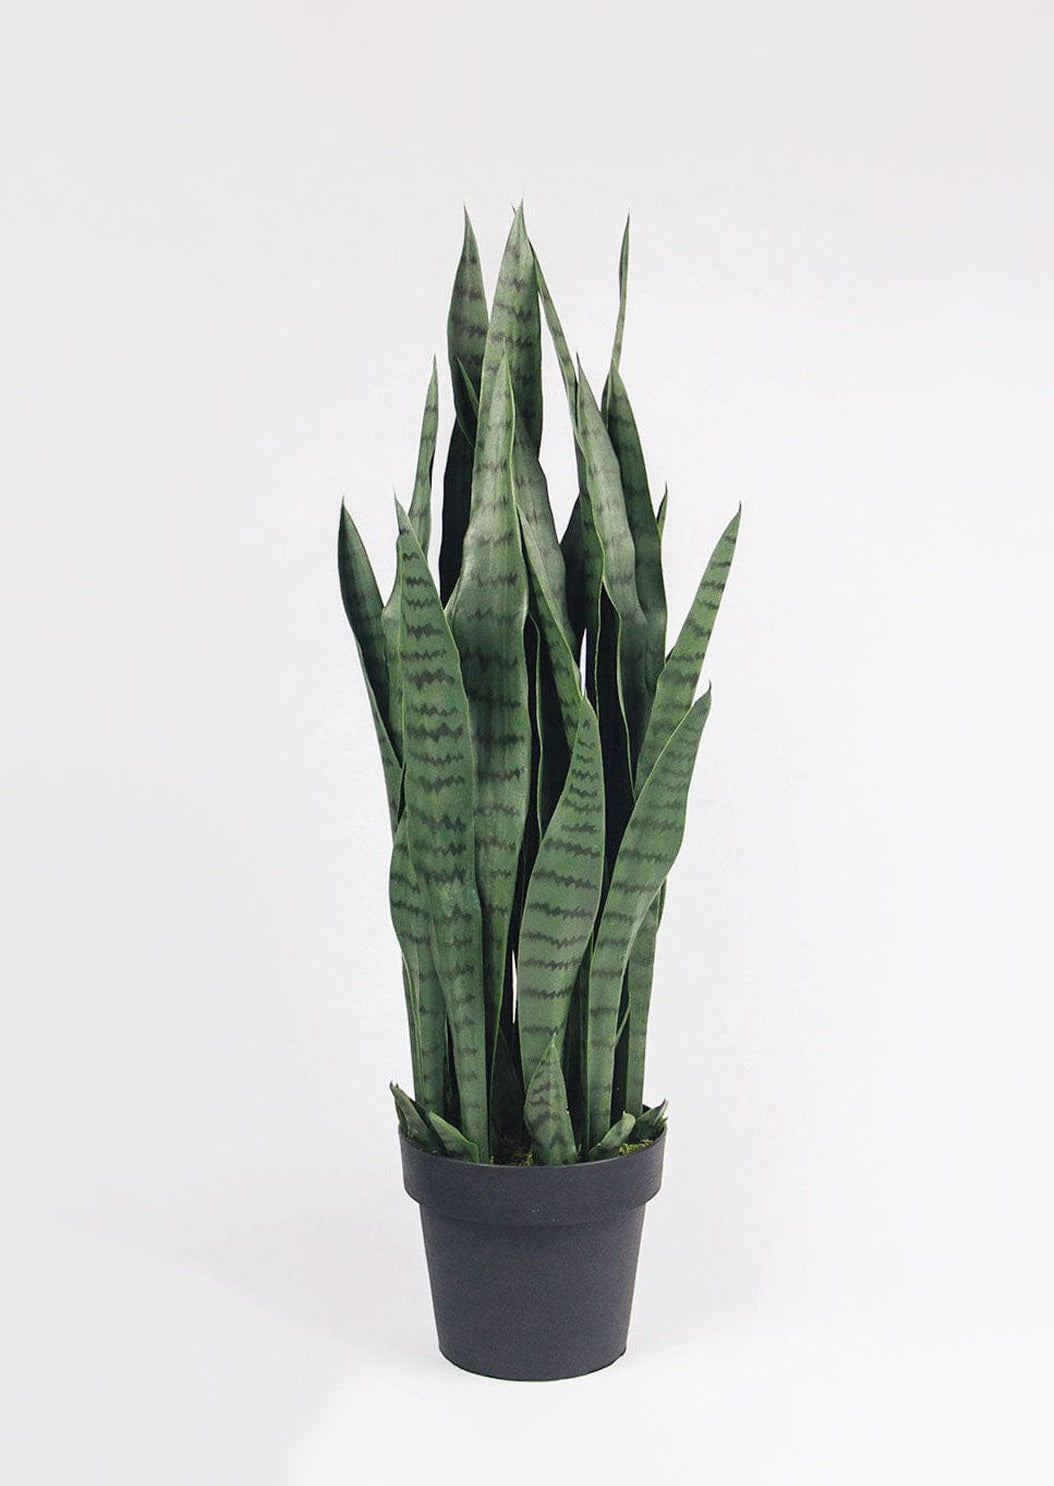 Artificial Potted Plants Snake Plant in Pot